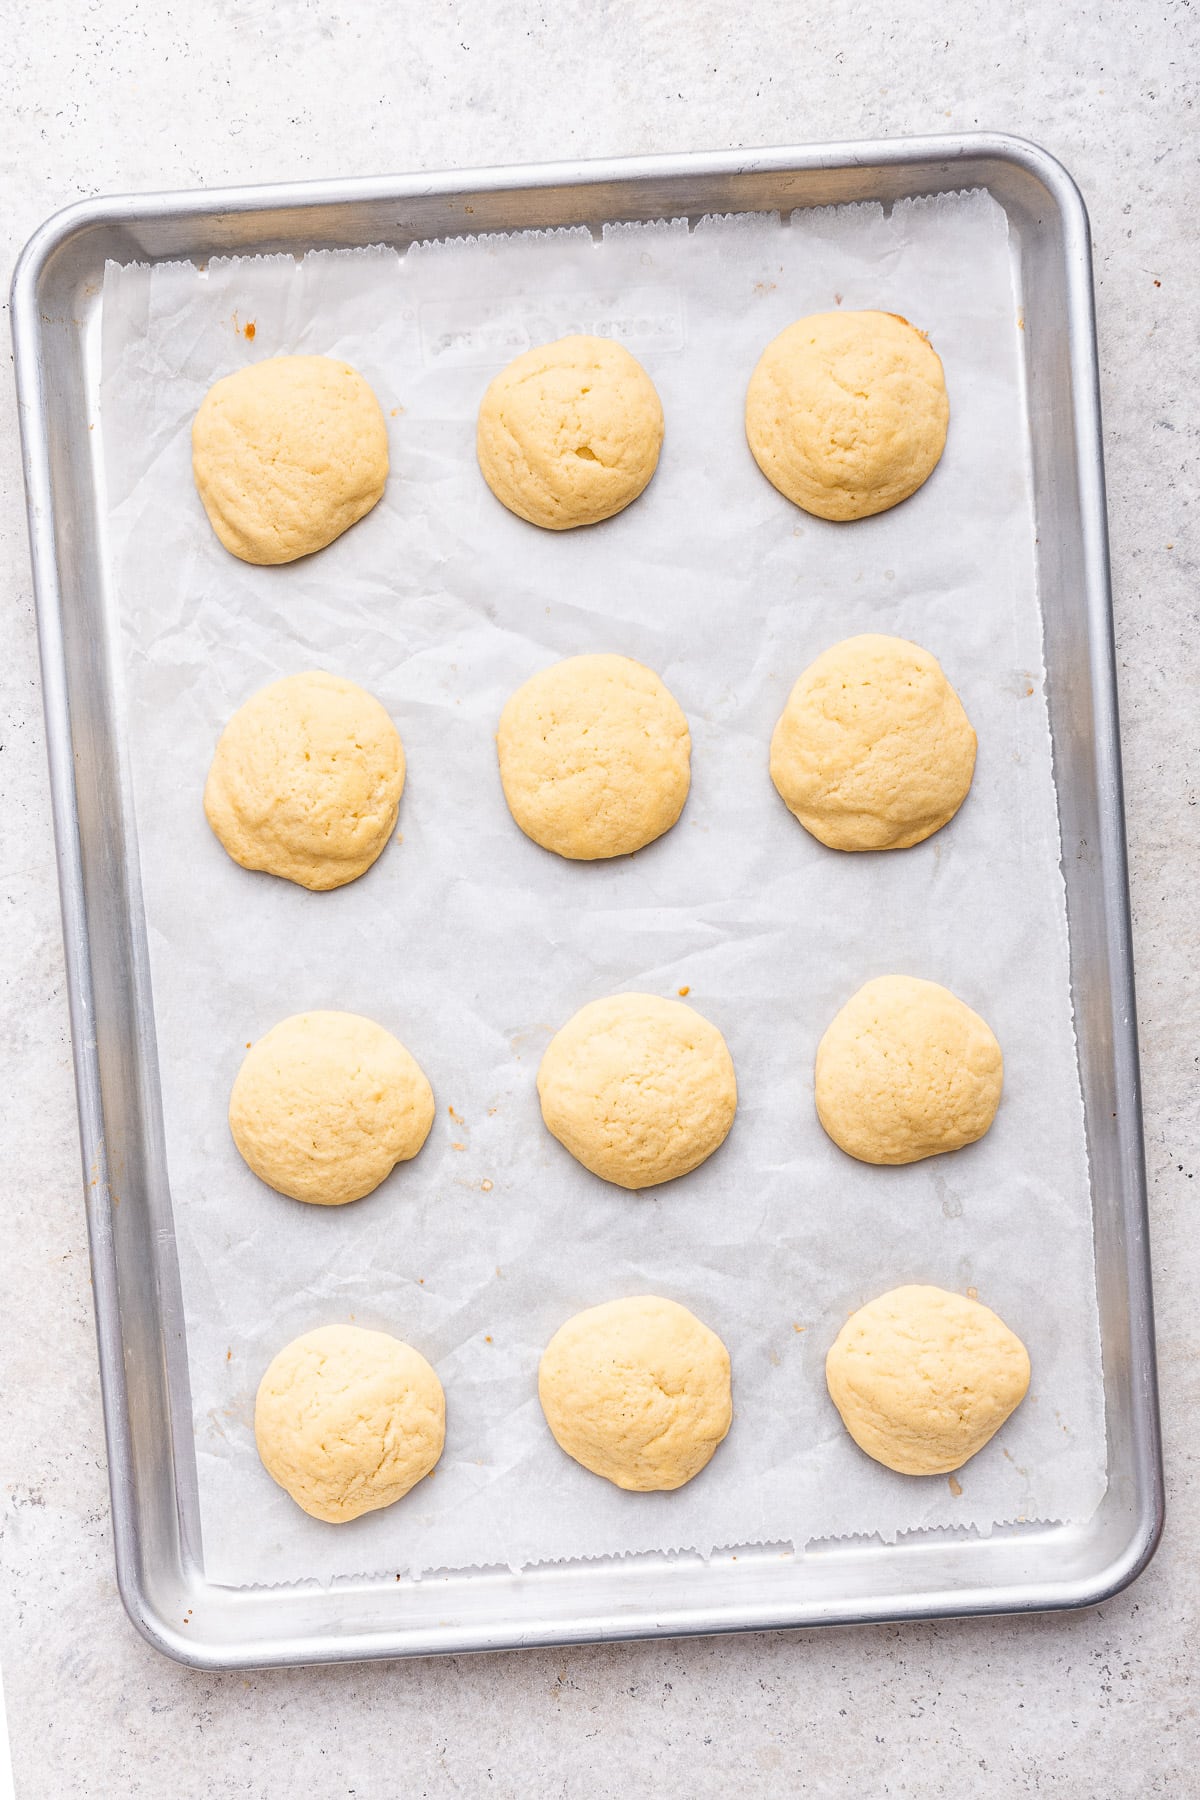 Tray of baked lemon ricotta cookies on parchment lined cookie sheet.